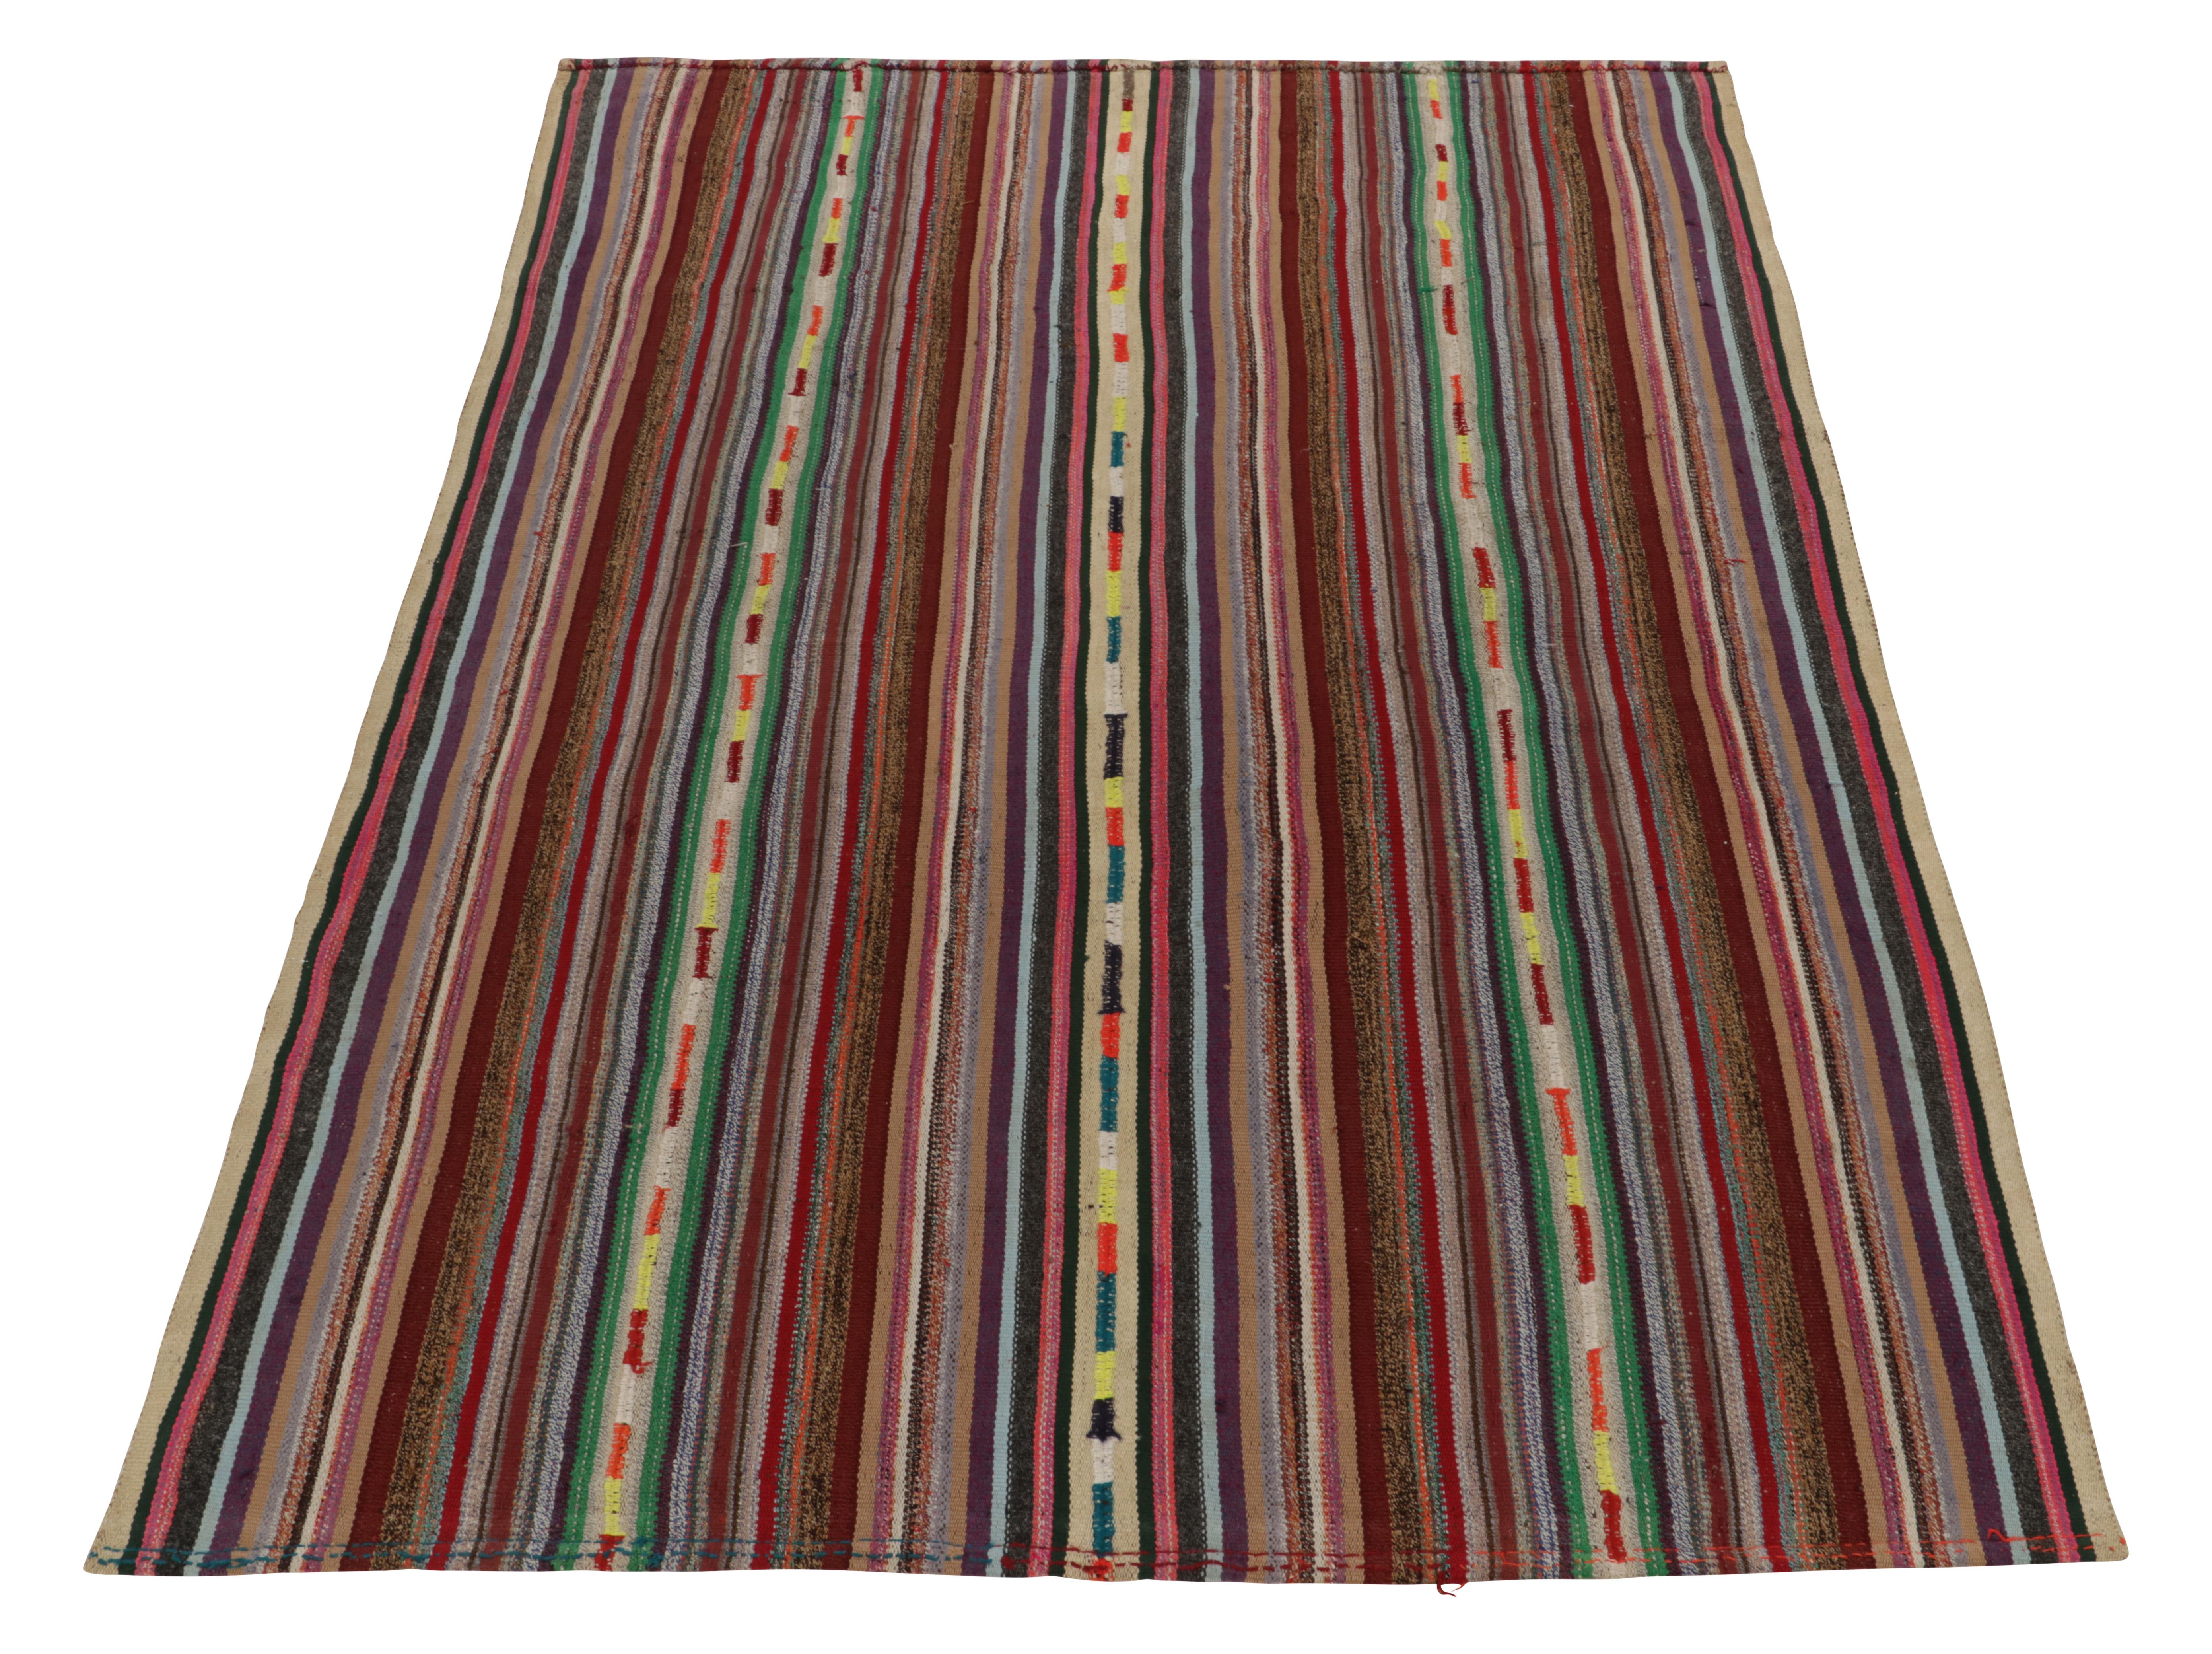 Originating from Turkey circa 1950-1960, a rare type of chaput kilim rug style now entering our vibrant classic selections. Characterized by fine detailing with fabulous colors within the polychromatic stripes, offering a departure from traditional